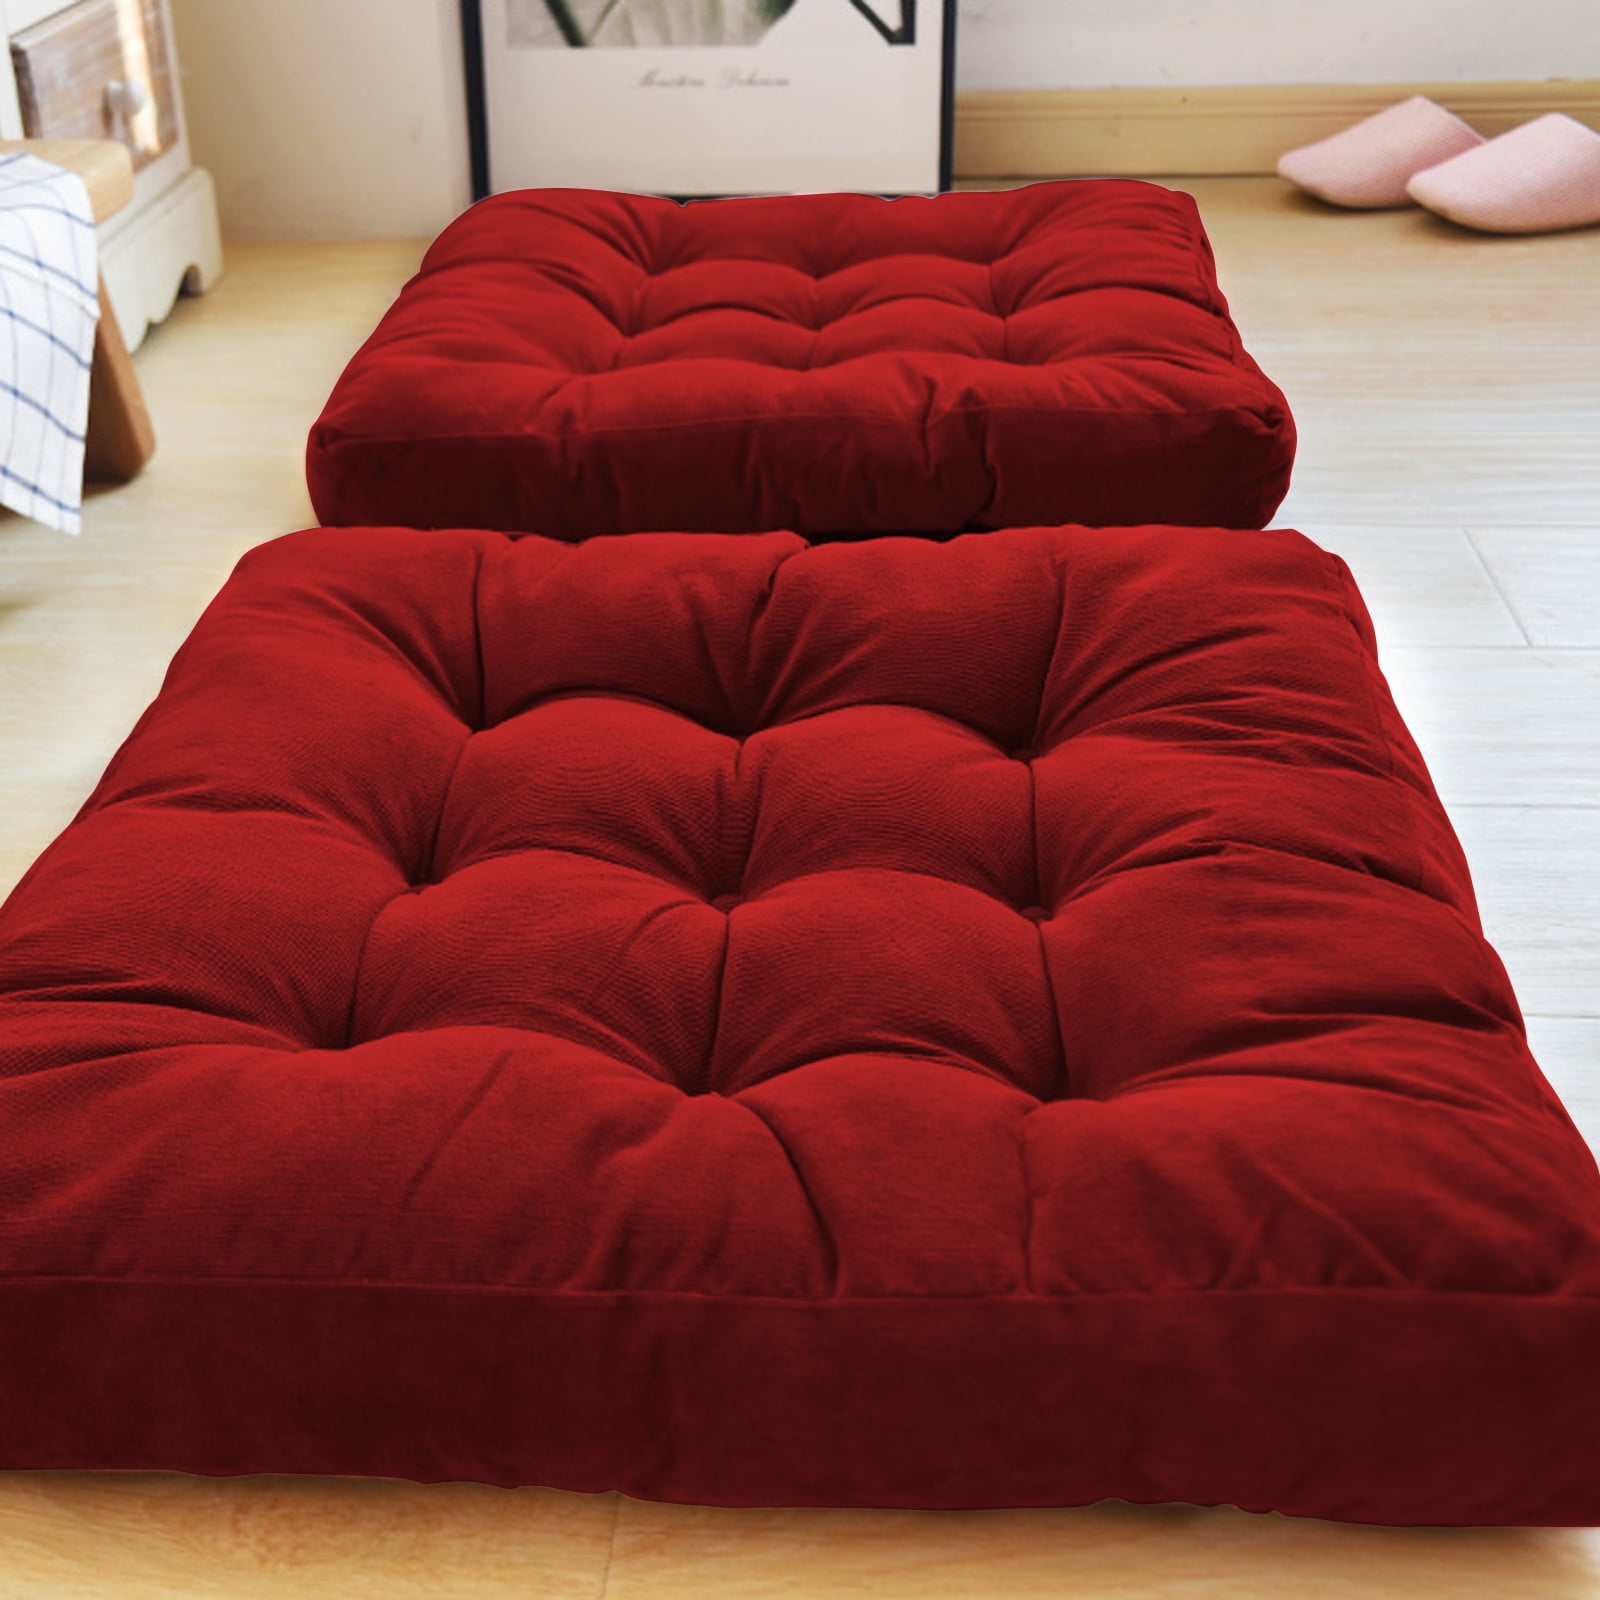 12 Incredible Floor Pillows Seating for 2023